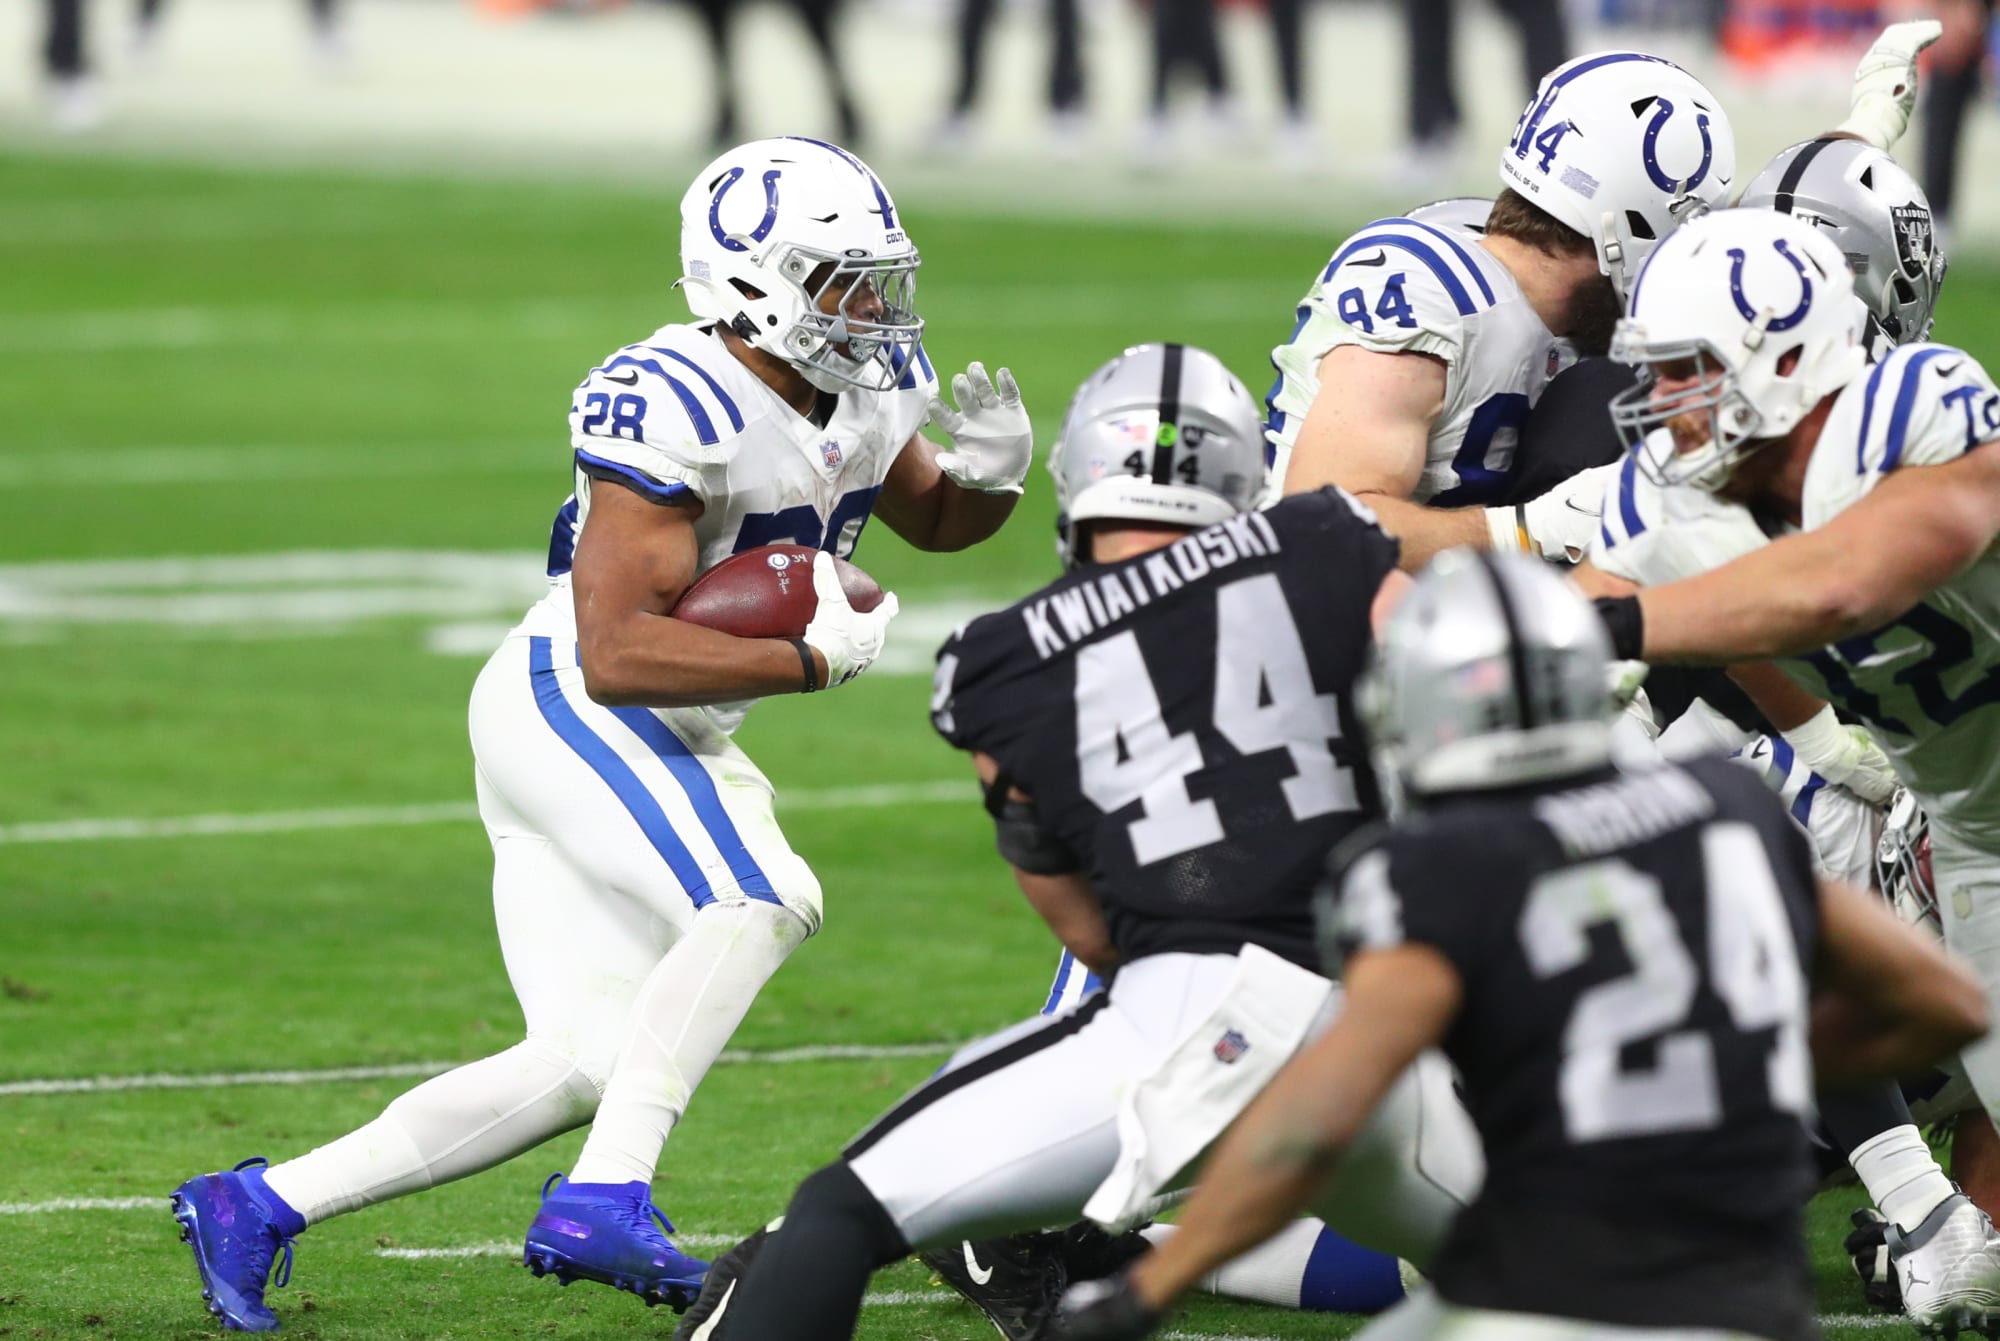 Colts Game Sunday Colts vs Raiders odds and prediction for NFL Week 17